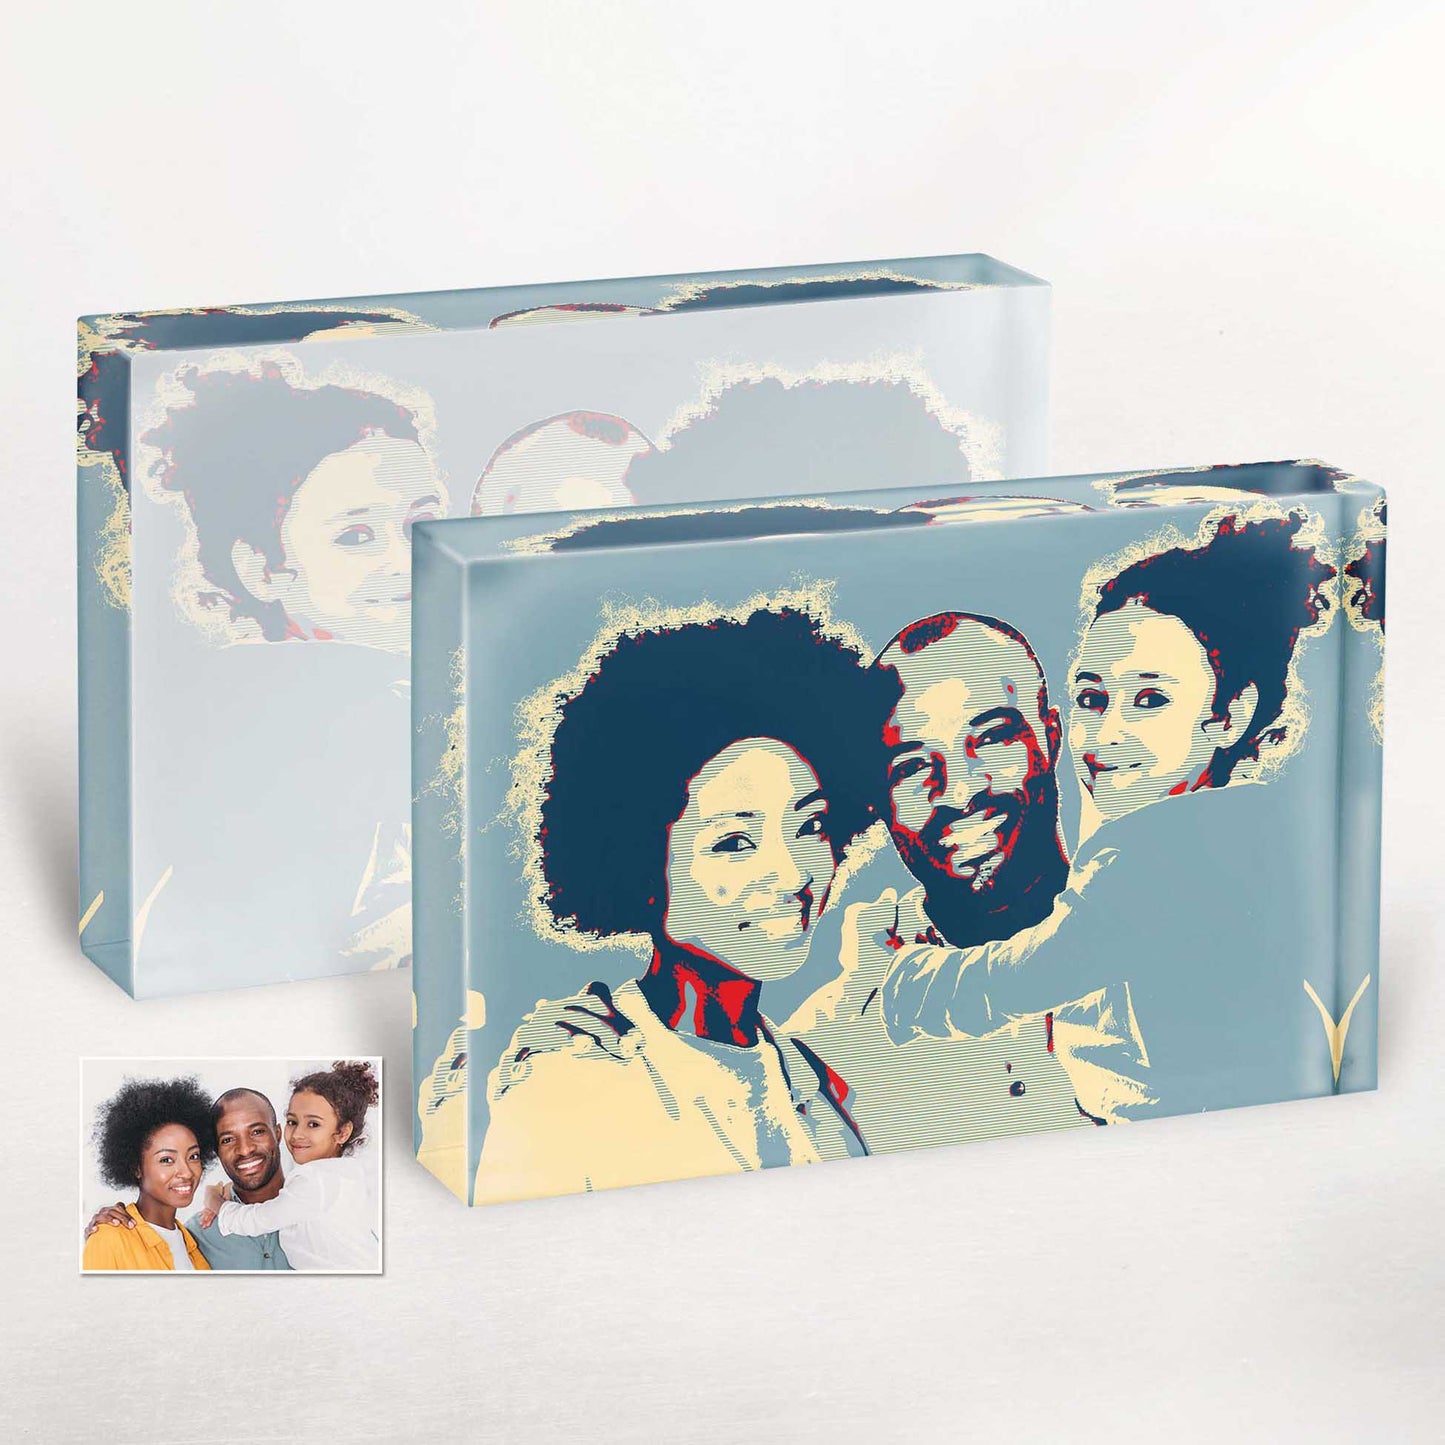 Add a touch of sophistication to your space with our Personalised Election Poster Acrylic Block Photo. Its cool and hip design embodies originality and elegance, creating an eye-catching piece of unique artwork